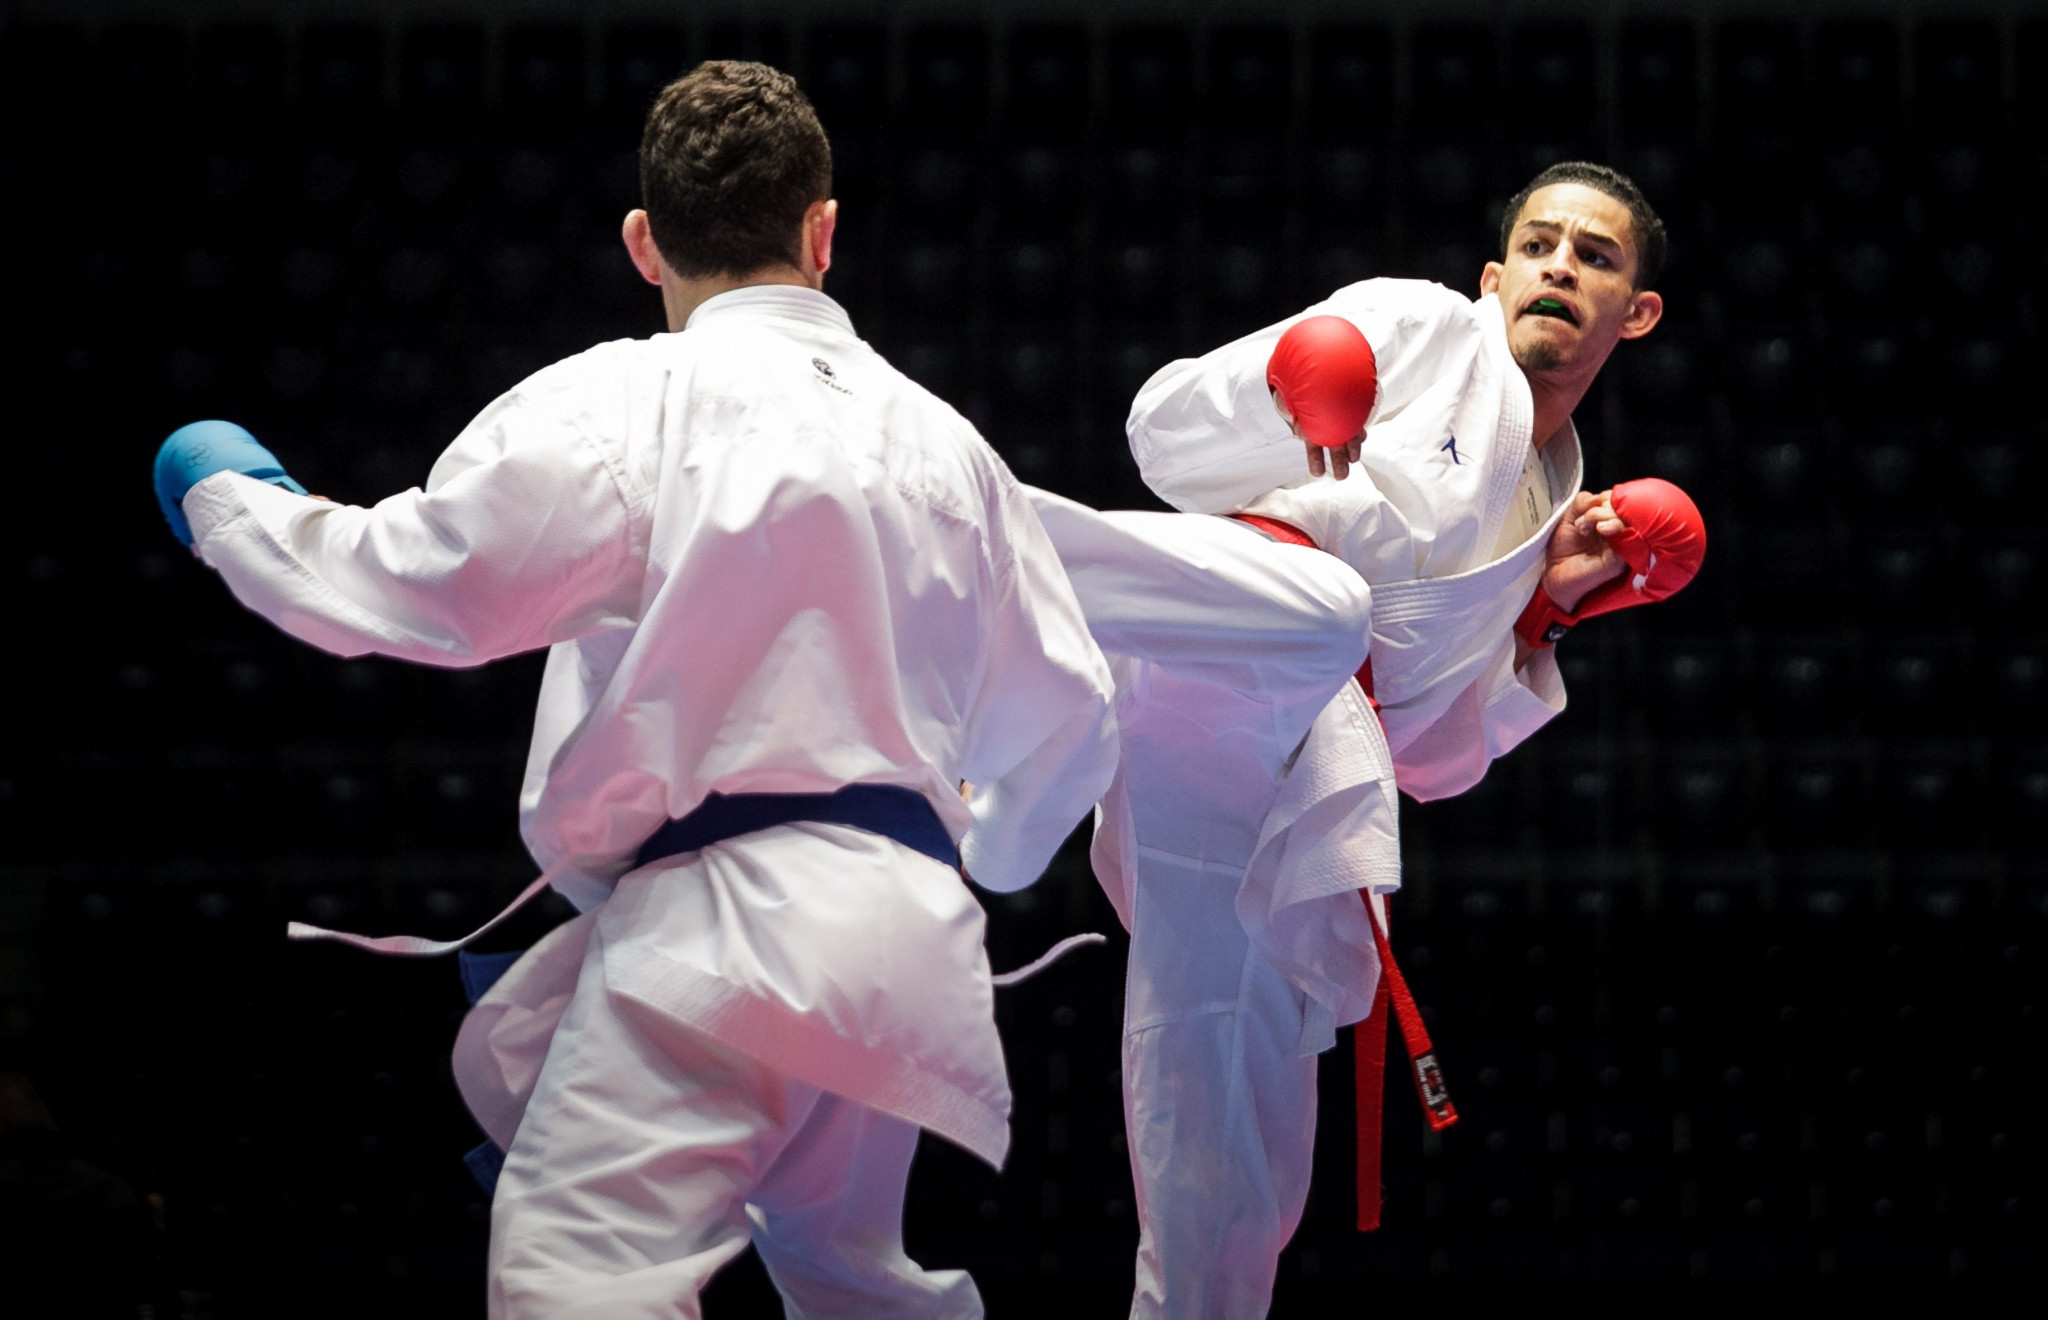 Jordan Thomas, right, is hoping to compete at Paris 2024 after pivoting from karate to taekwondo ©Getty Images